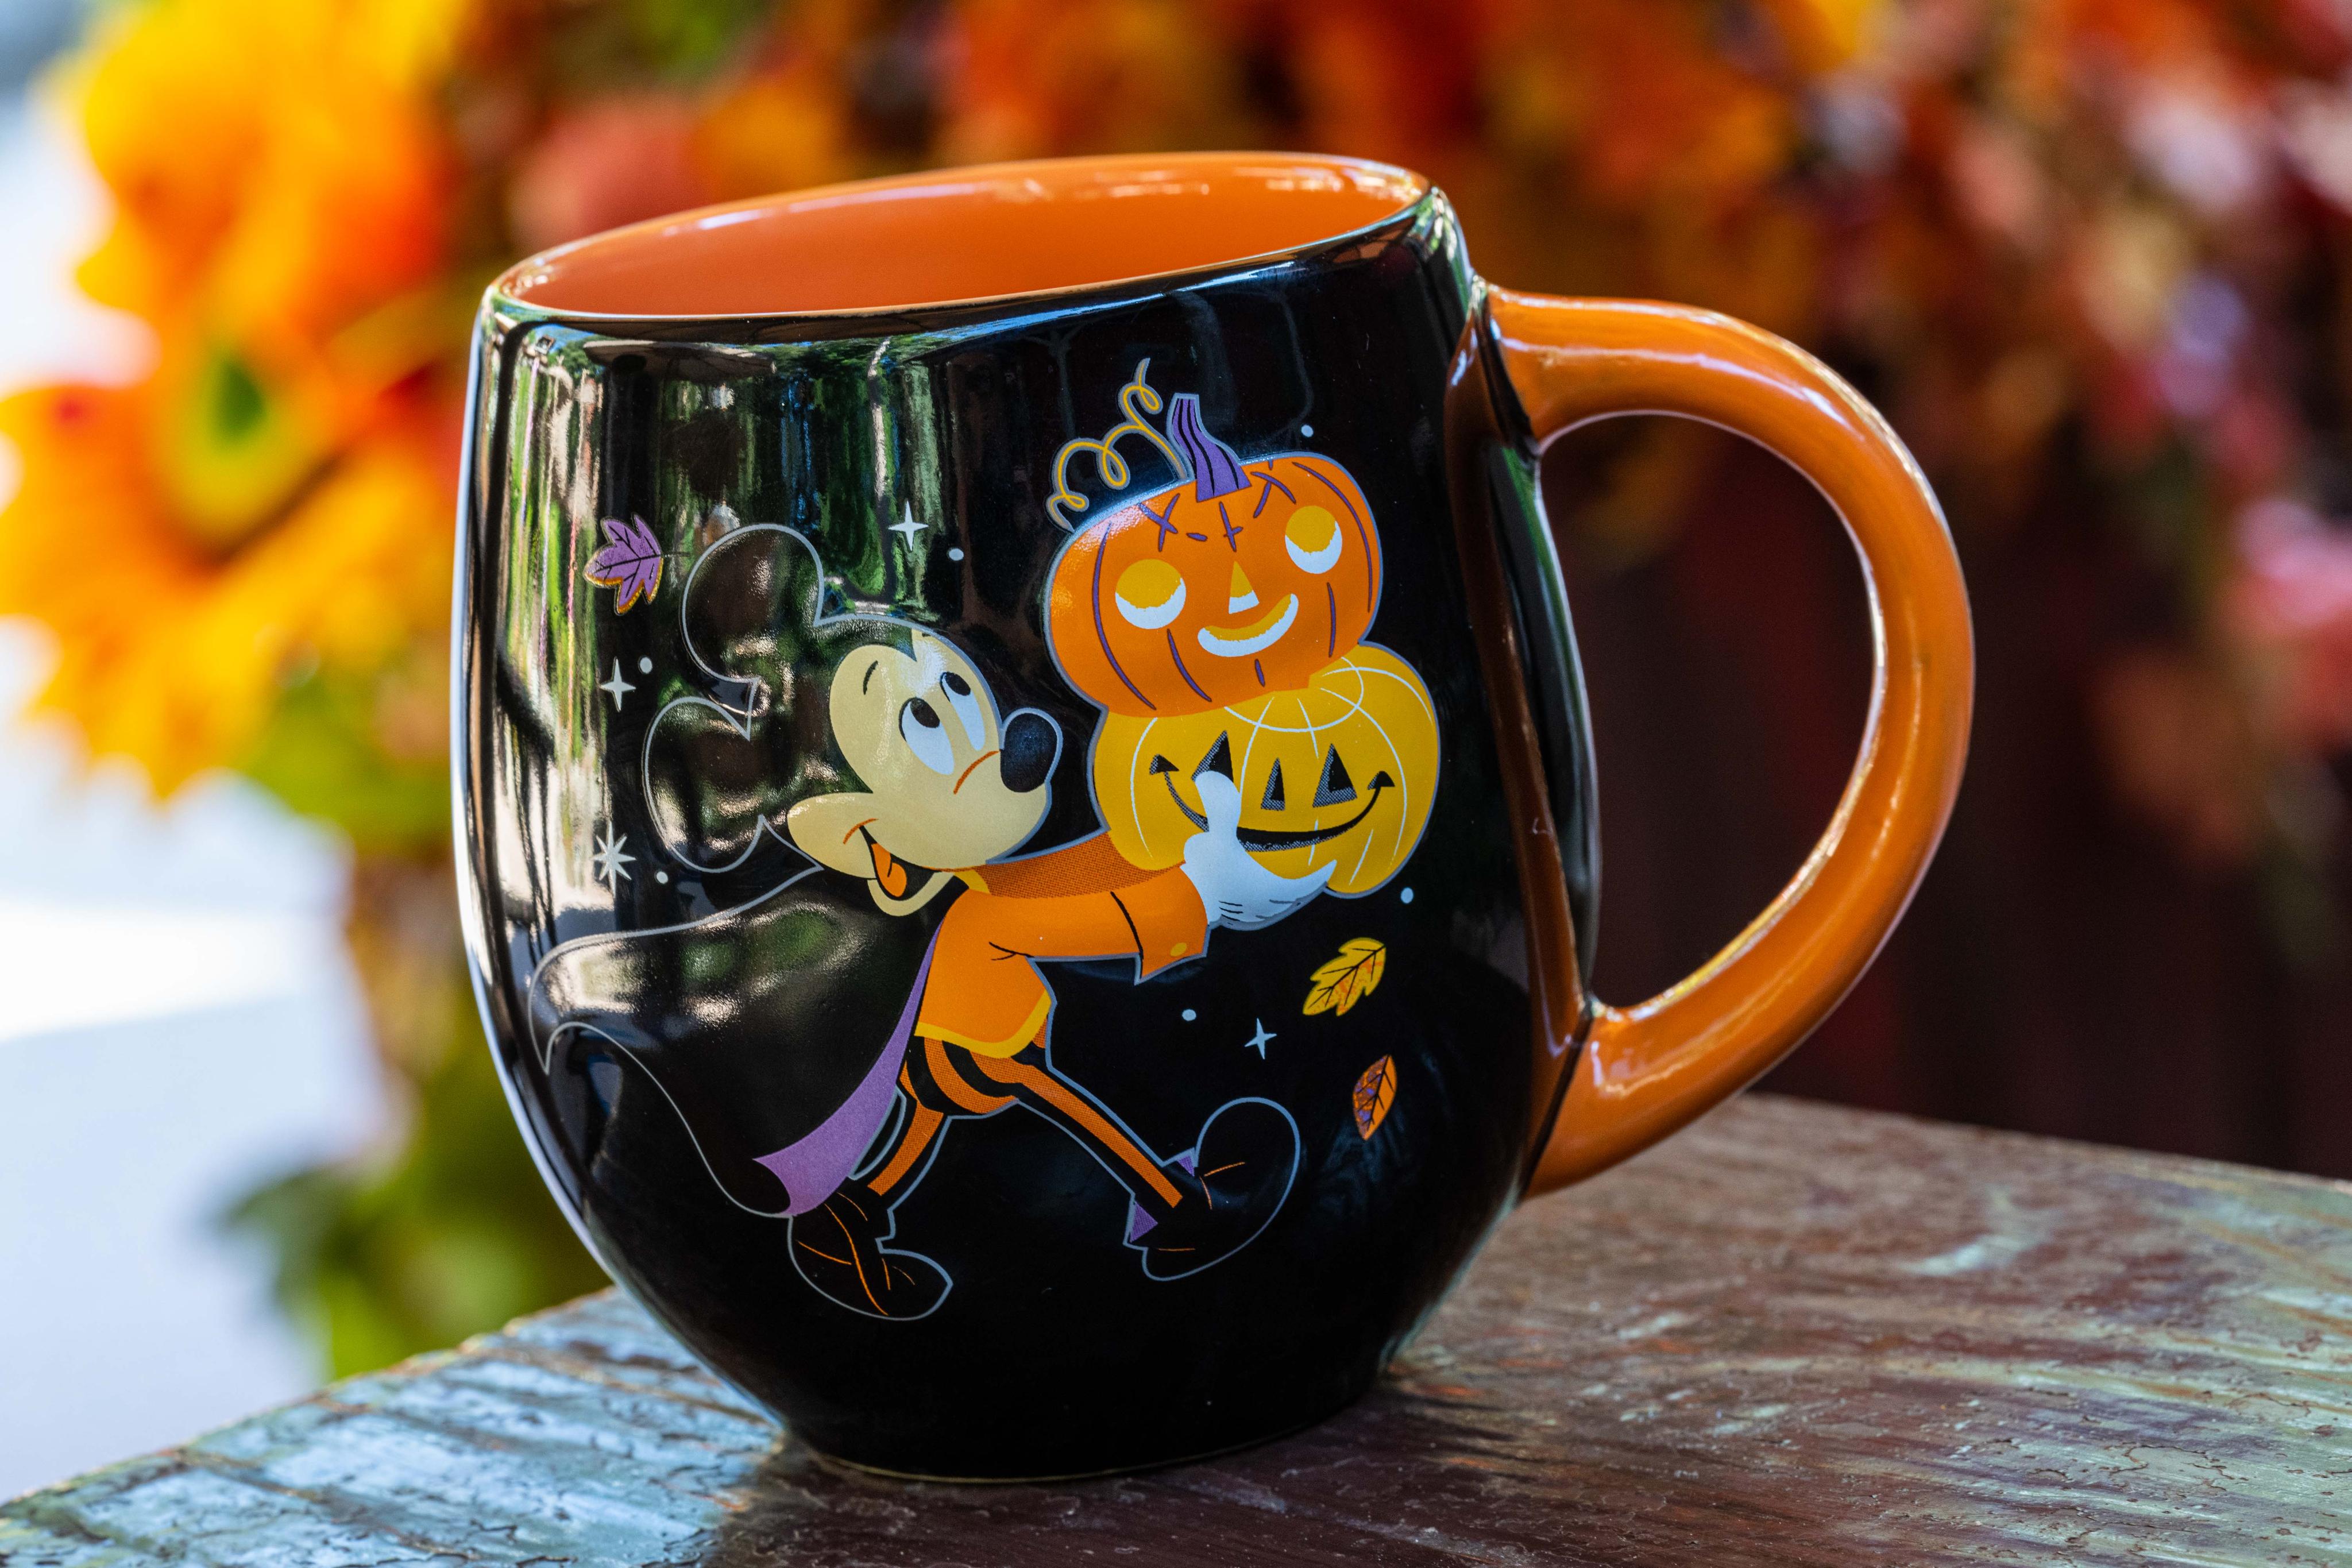 Disneyland Paris EN on X: "Add a mischievous touch to tea time with this  new Halloween mug ☕🎃 https://t.co/YvPH2dcEt8" / X